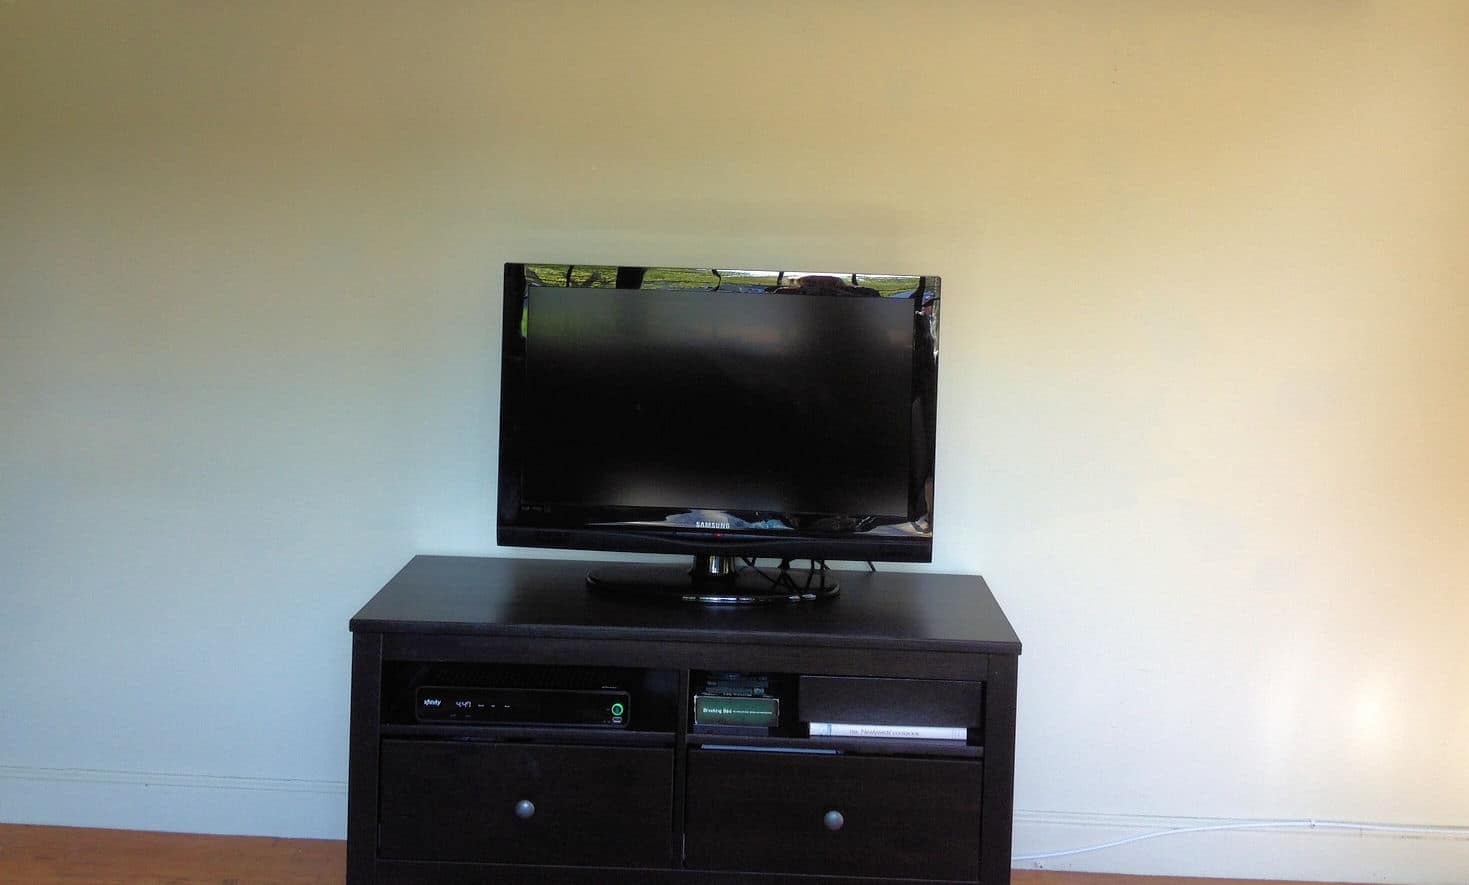 A flat screen television sitting on top of a dark, wooden table in front of a plain wall